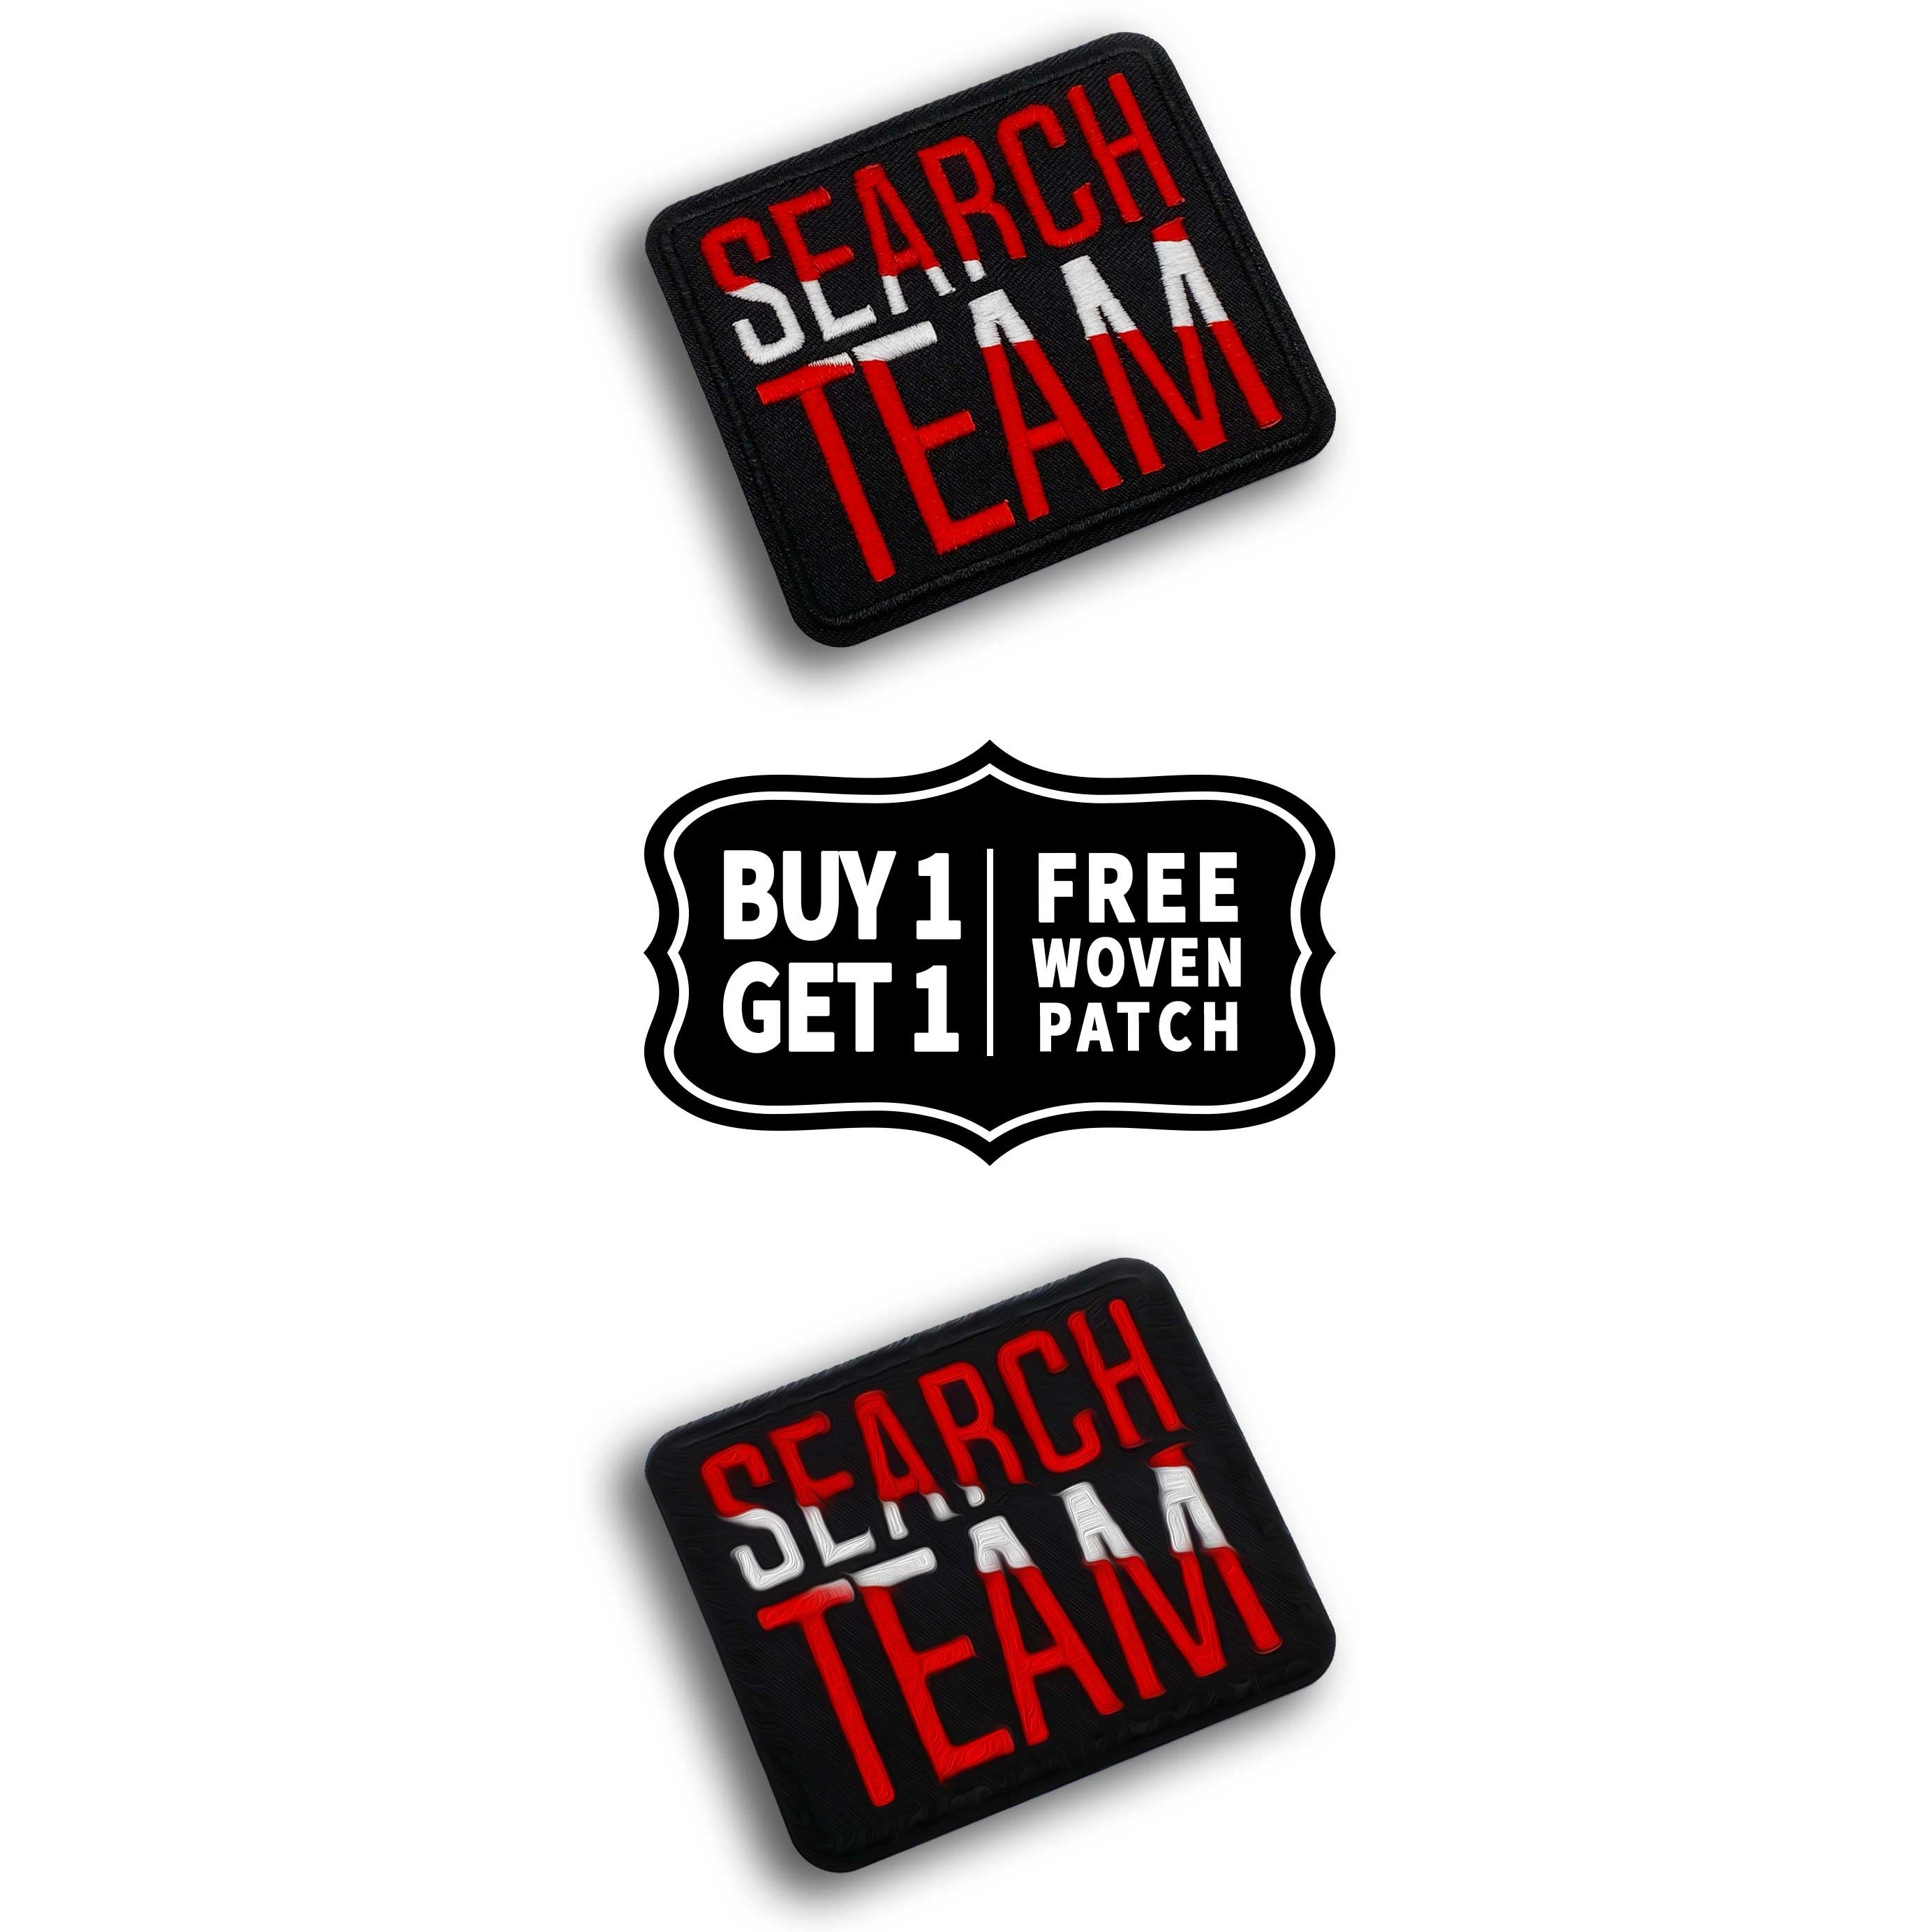 Iron-on Patch: SEARCH TEAM